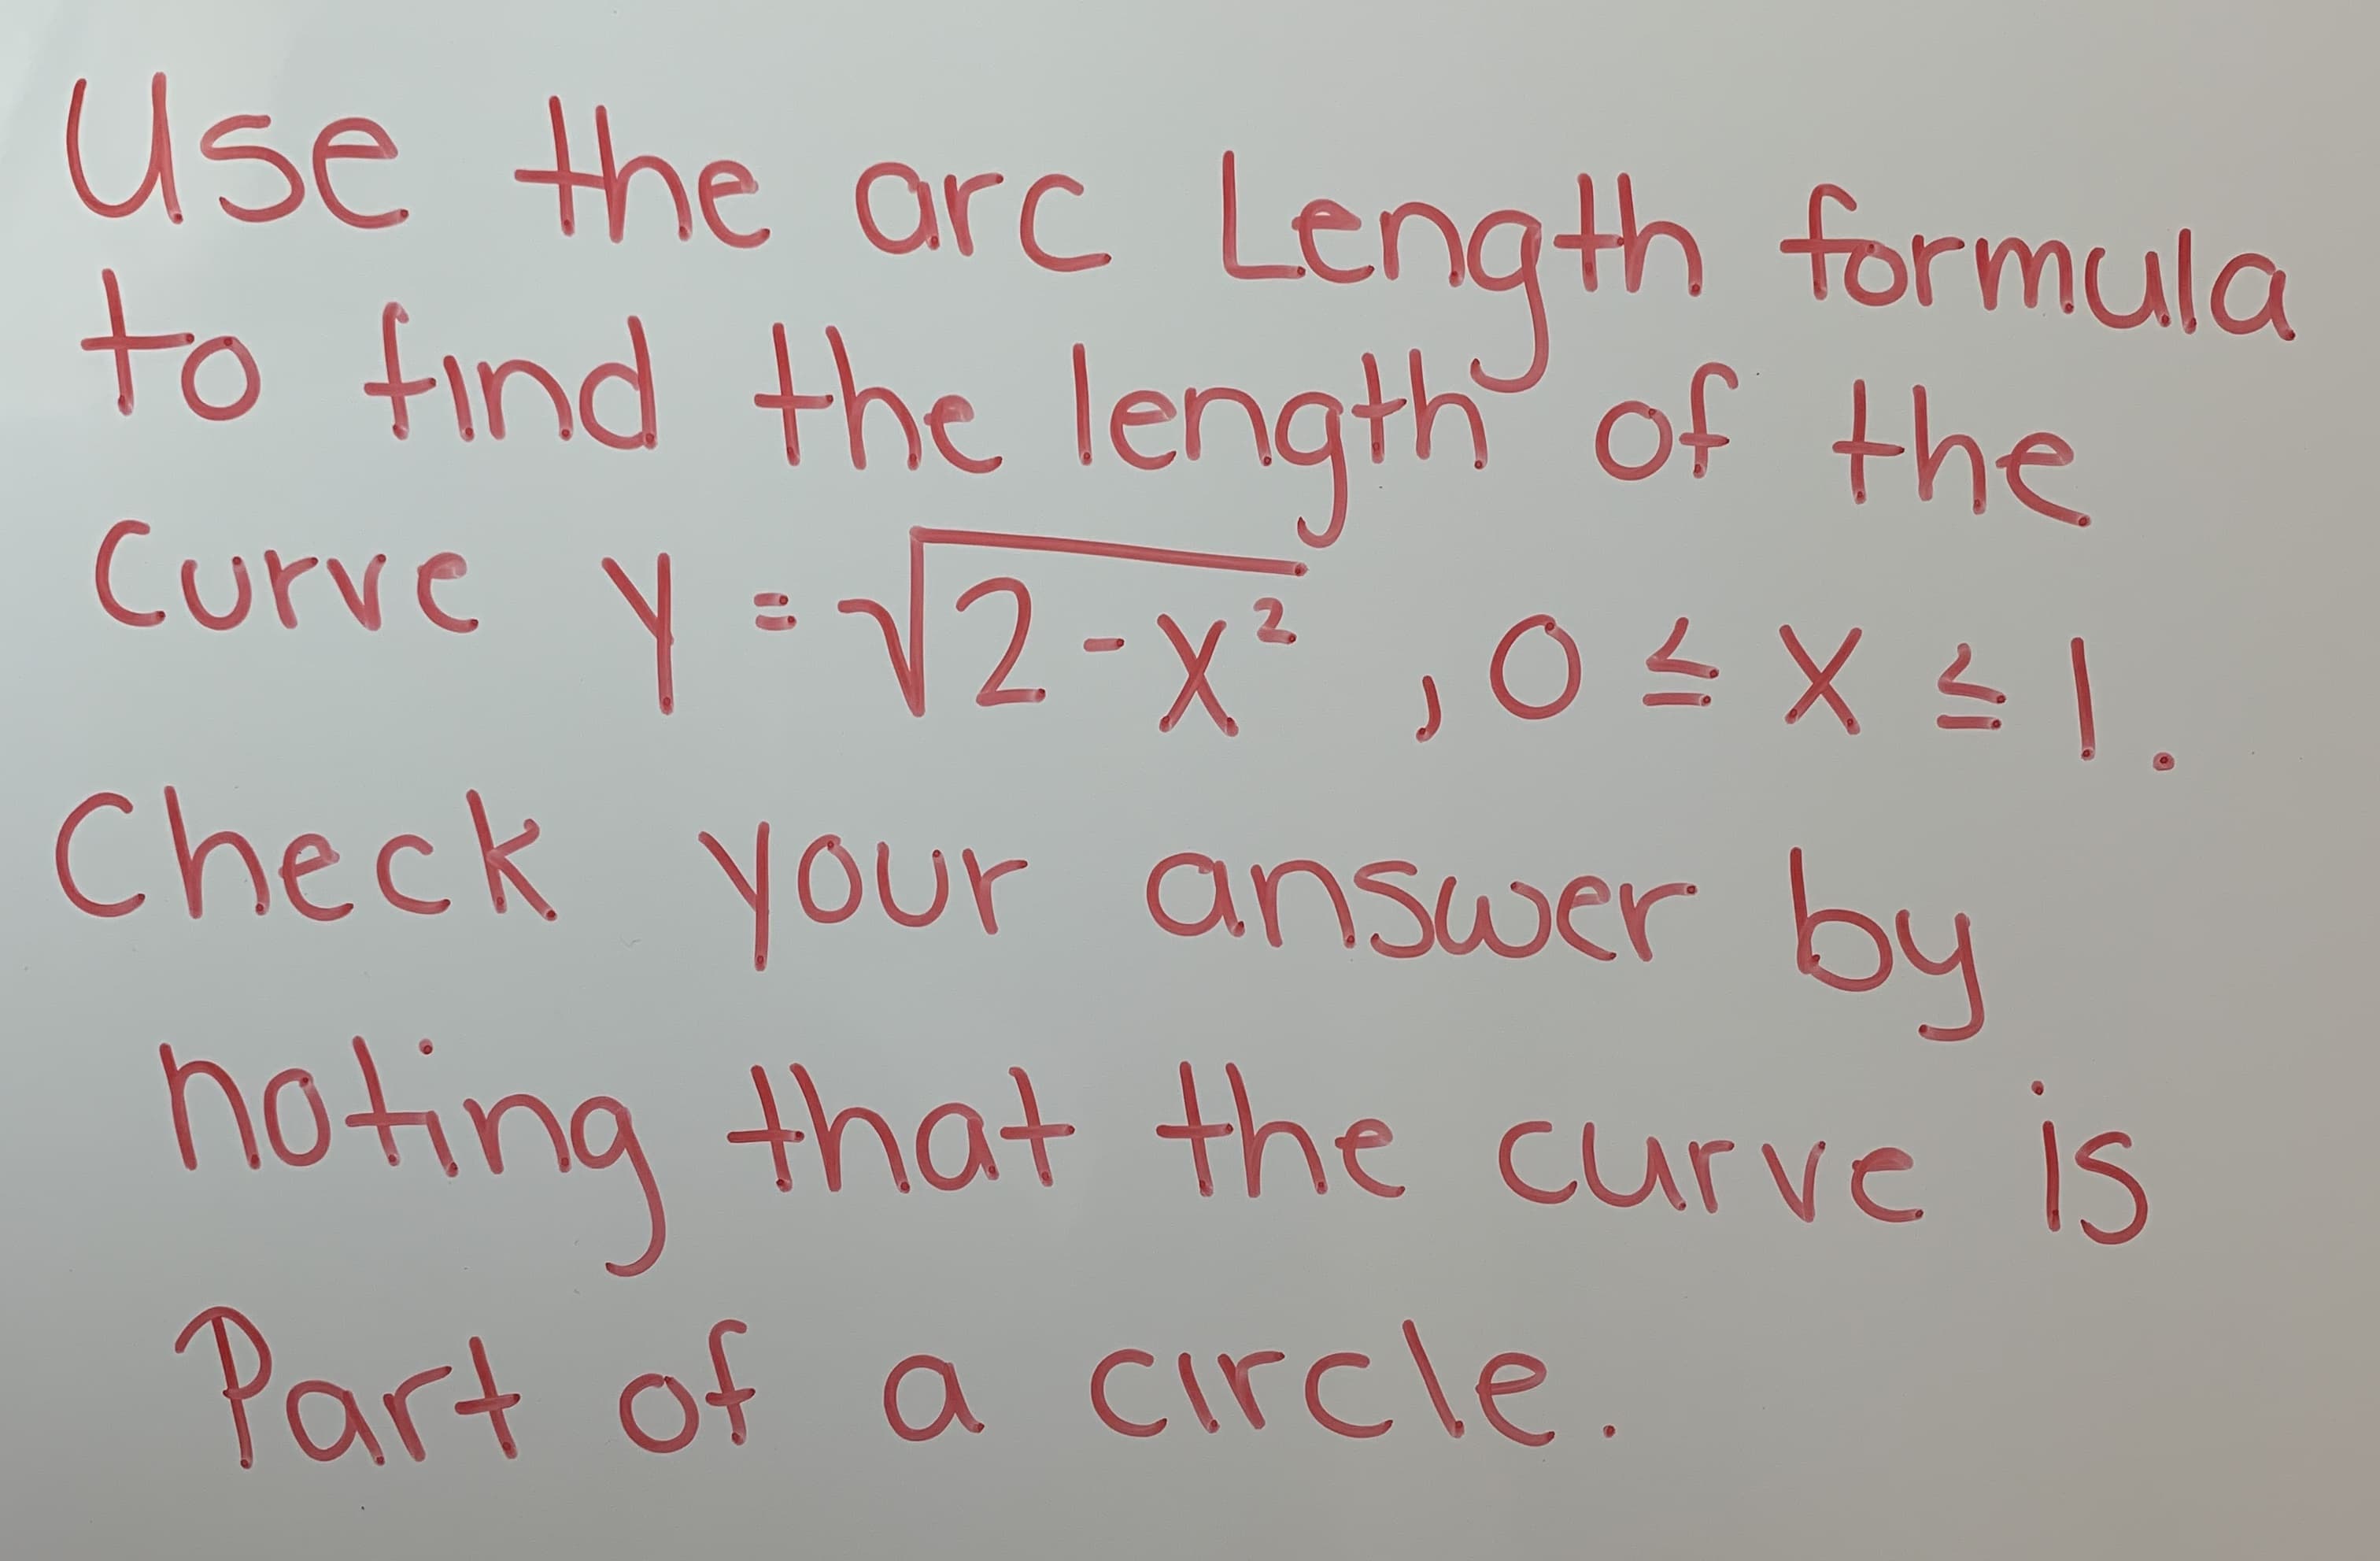 Use the arc Length formula
to find he lenath of the
Curve N
Check your answer by
hoting that the curve IS
Part of a circle
